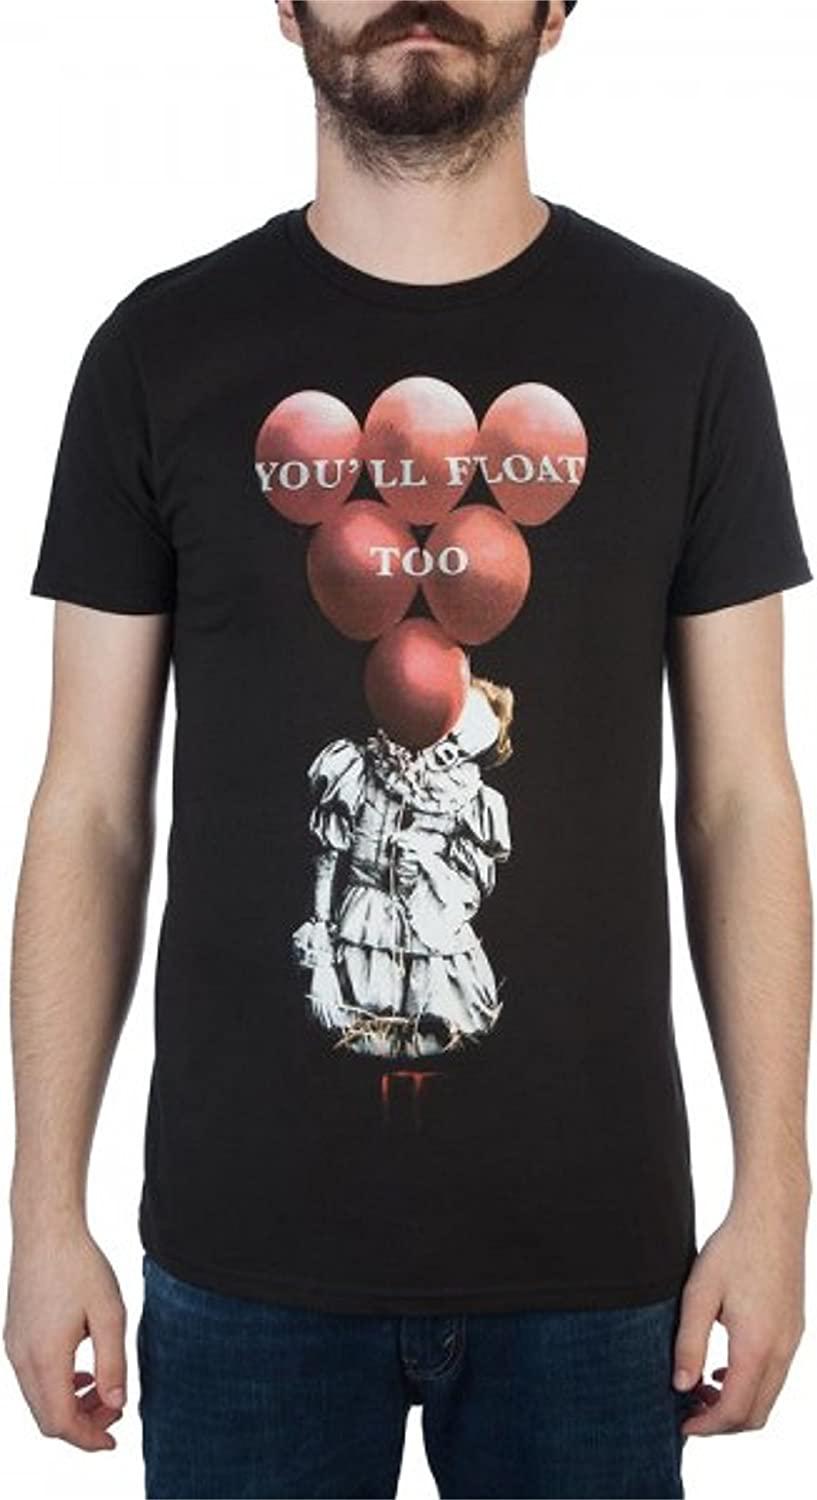 IT Pennywise T-Shirt Pennywise Red Balloons IT The Movie